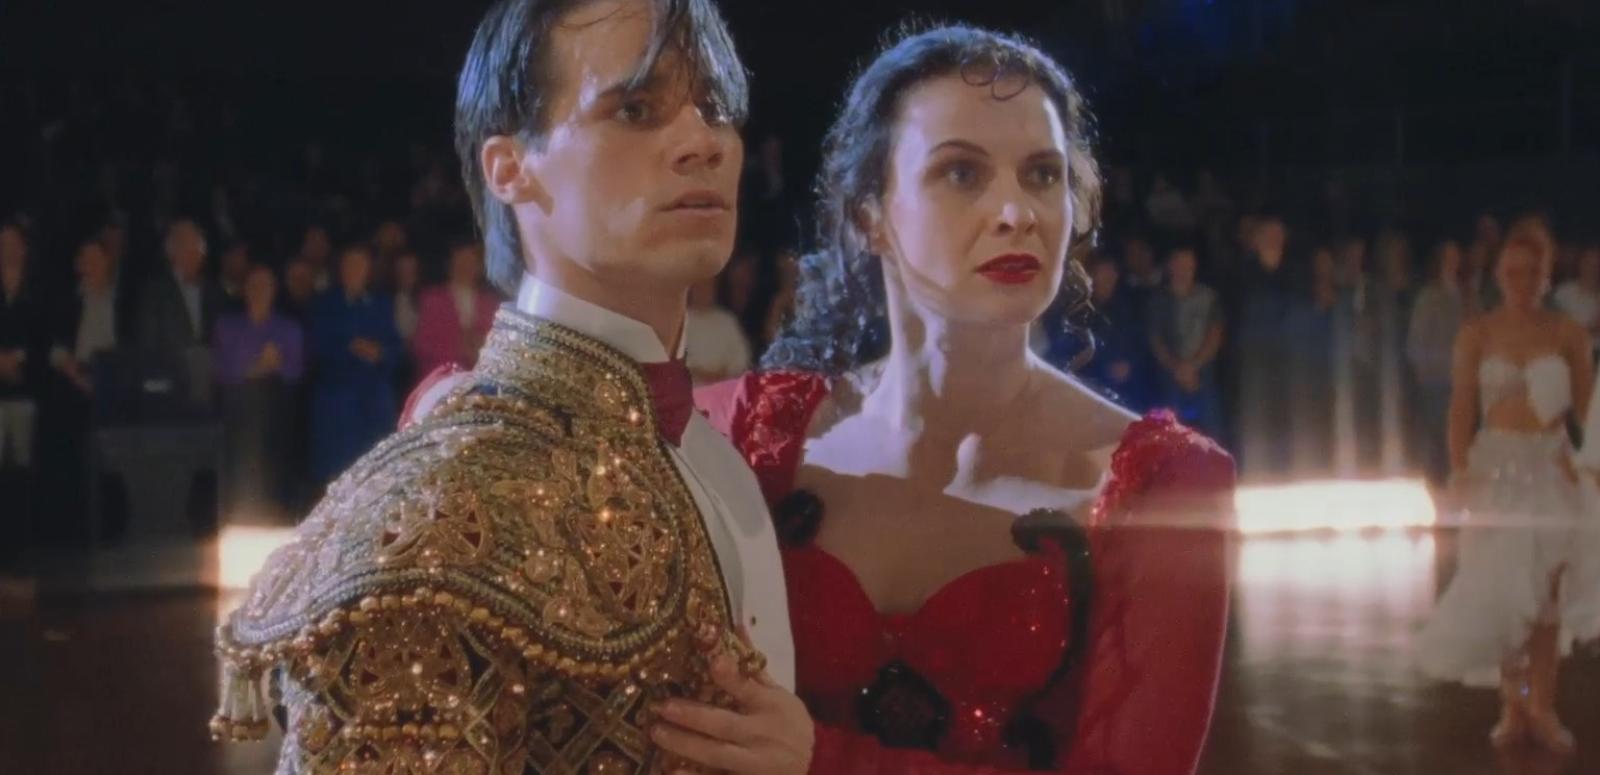 A young man and woman pictured from waist up on a dance floor wearing ballroom costumes look anxiously at something off camera